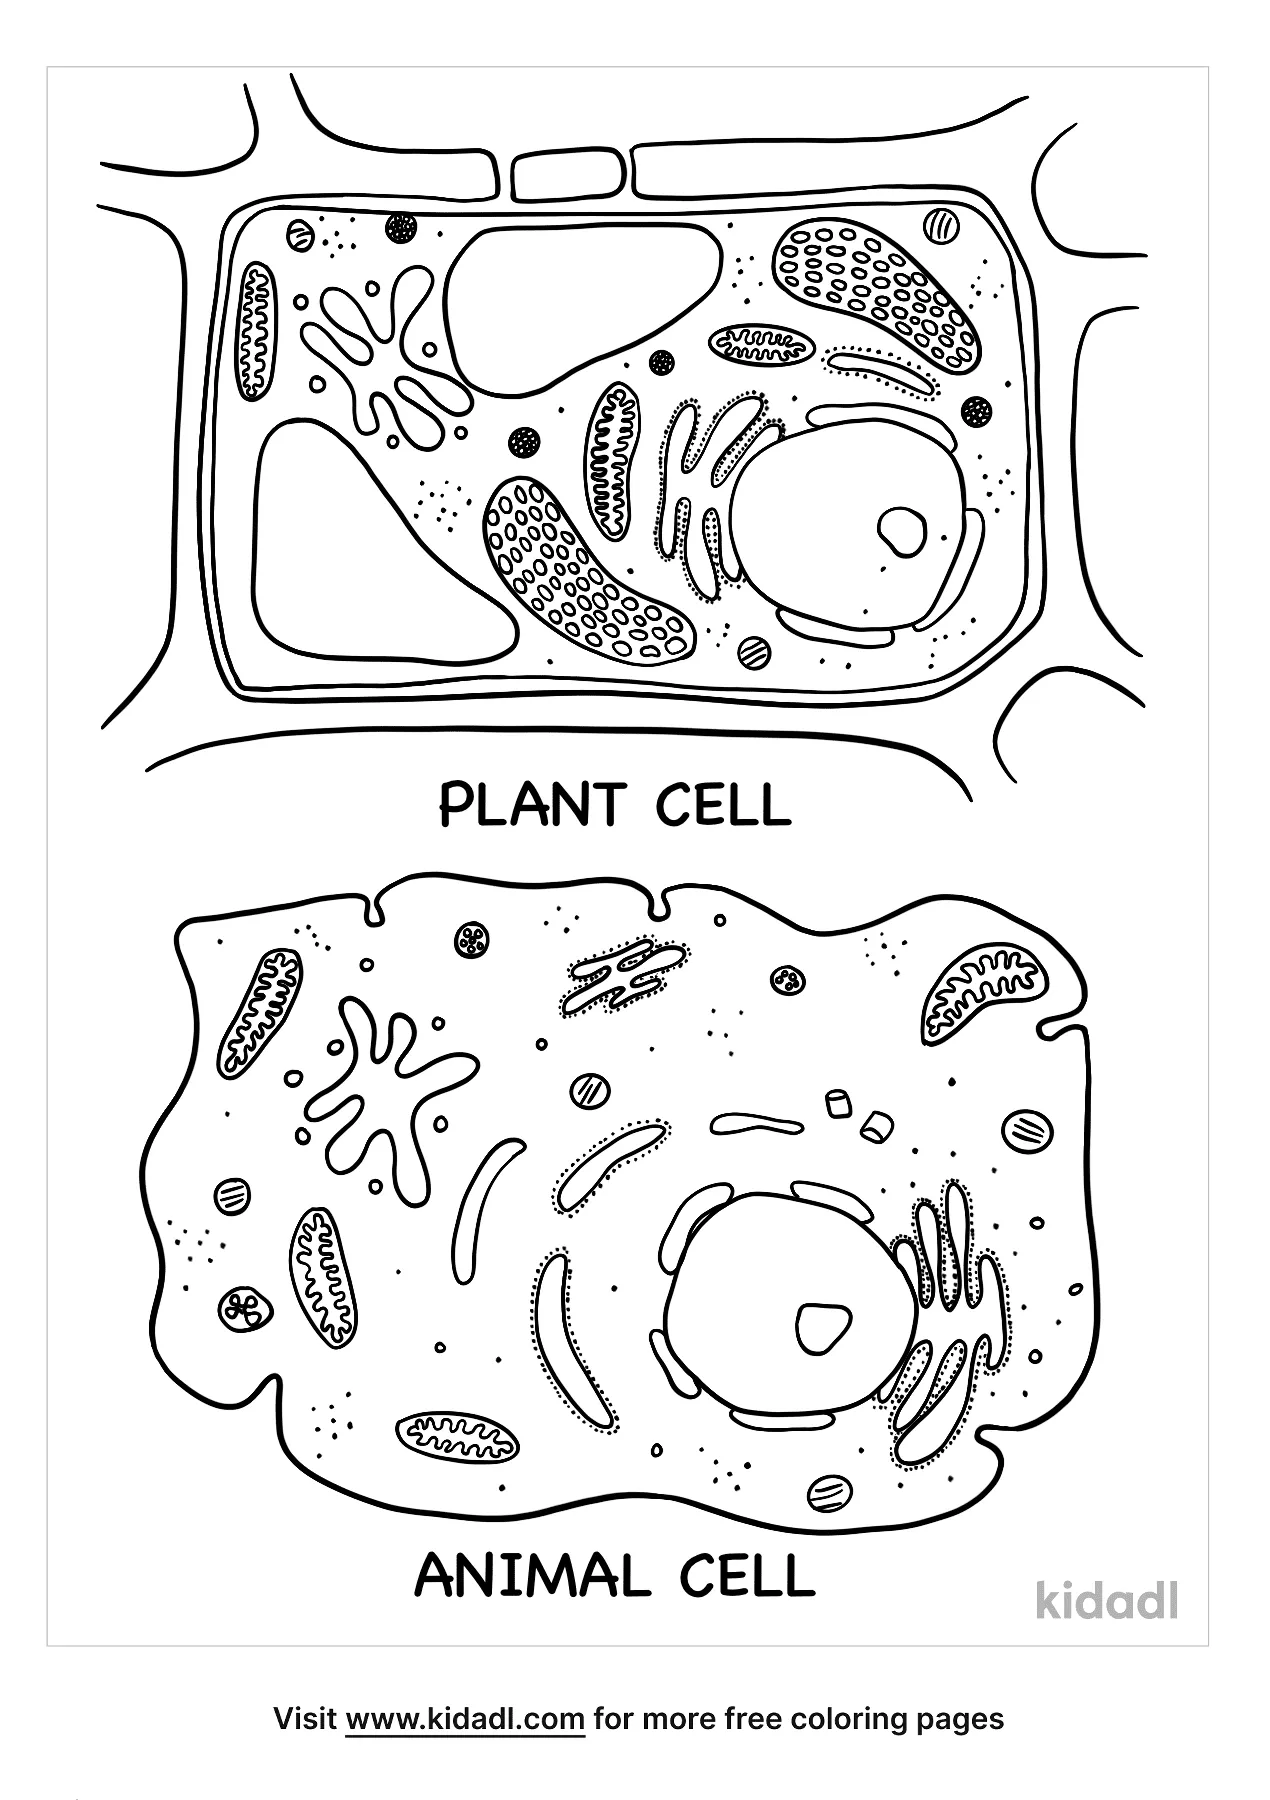 Free Plant And Animal Cell Grade School Coloring Page | Coloring Page  Printables | Kidadl